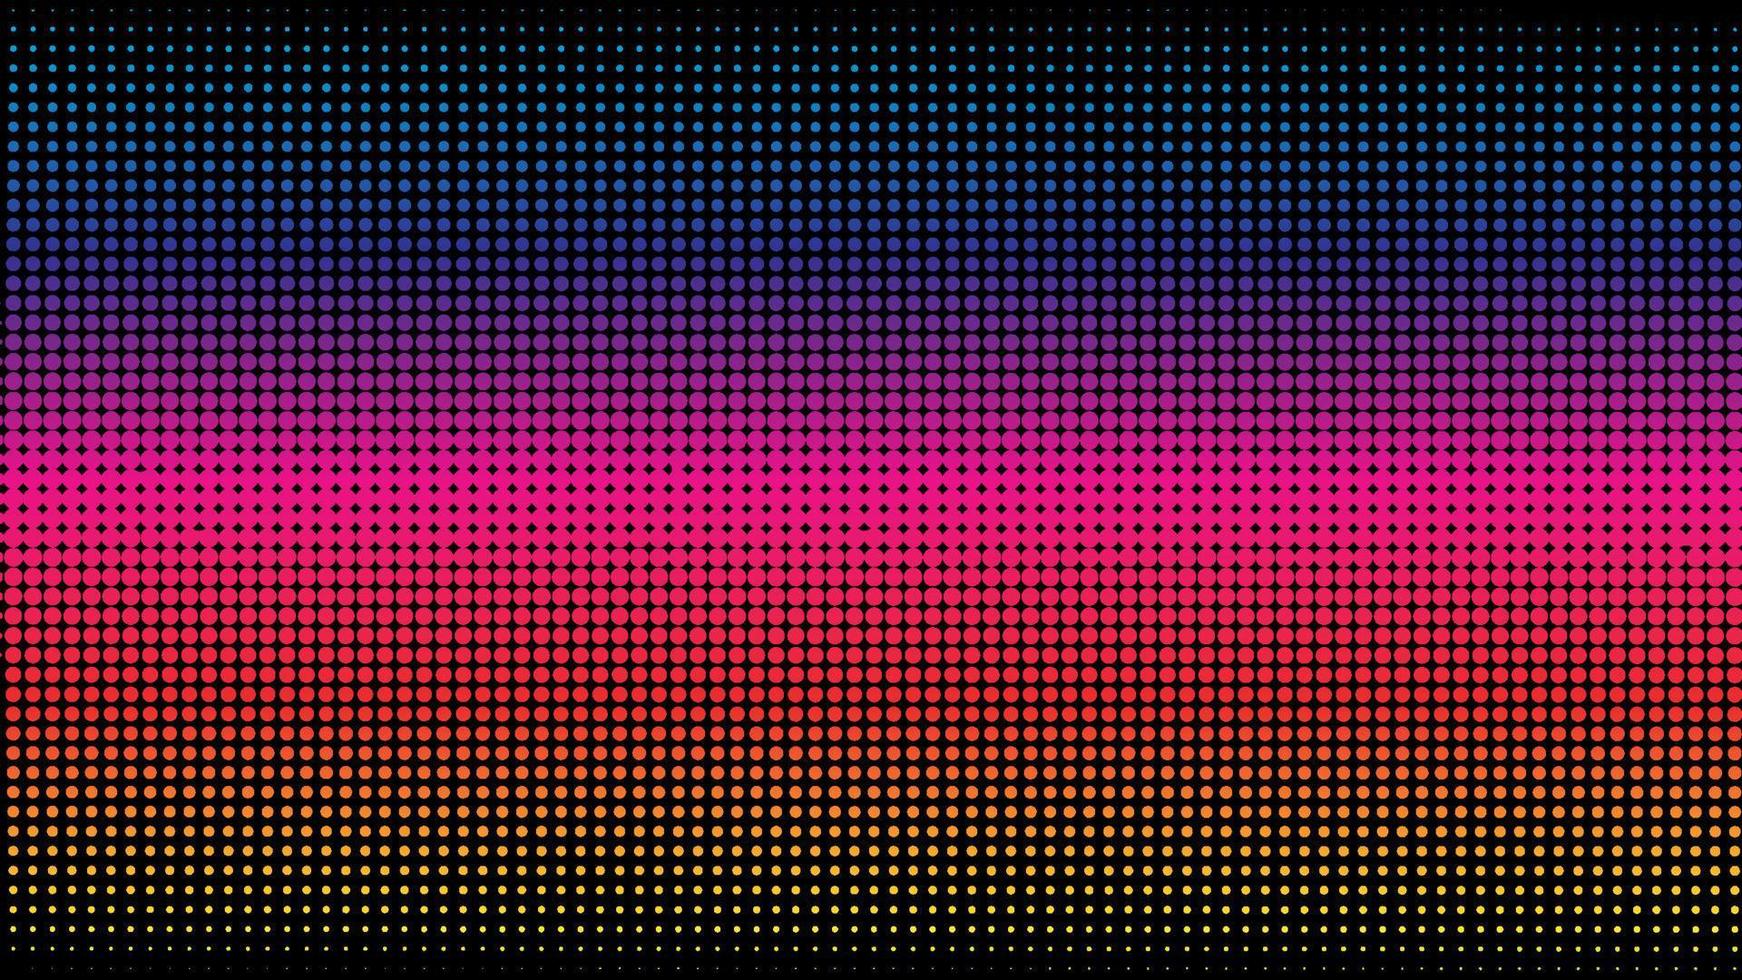 Colorful Halftone Background Design Template, Pop Art, Abstract Dots Pattern Illustration, Rainbow Gradation Wallpaper, Modern Texture Element, Bright Neon Gradient Color, EPS 10 file Vector Project